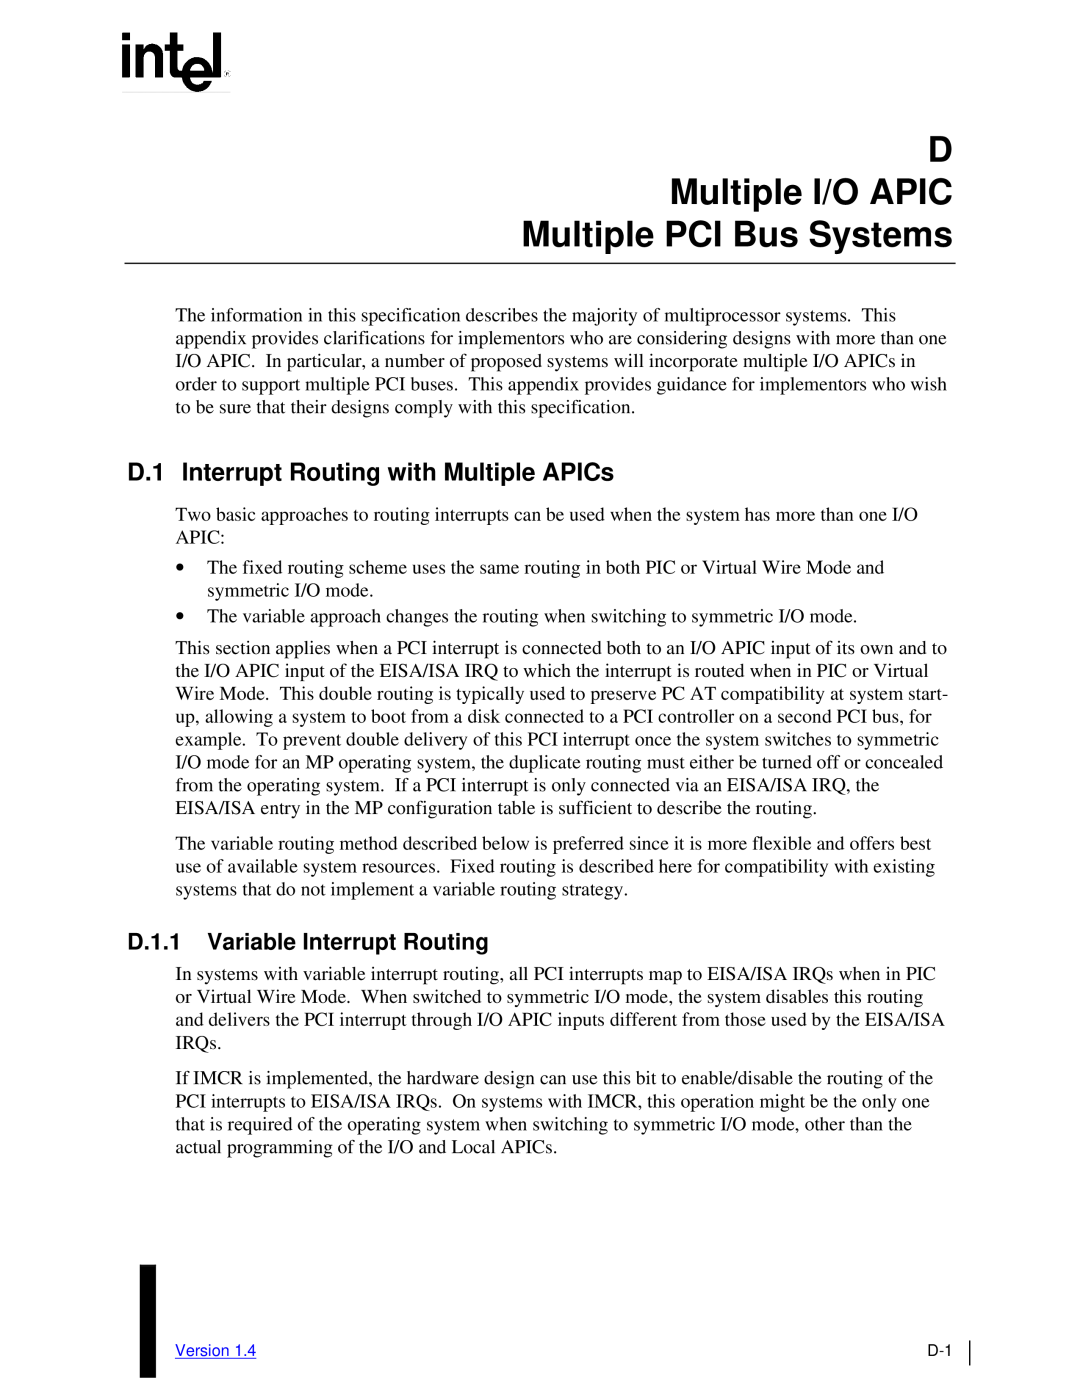 Intel MultiProcessor manual D Multiple I/O APIC Multiple PCI Bus Systems, D.1 Interrupt Routing with Multiple APICs 